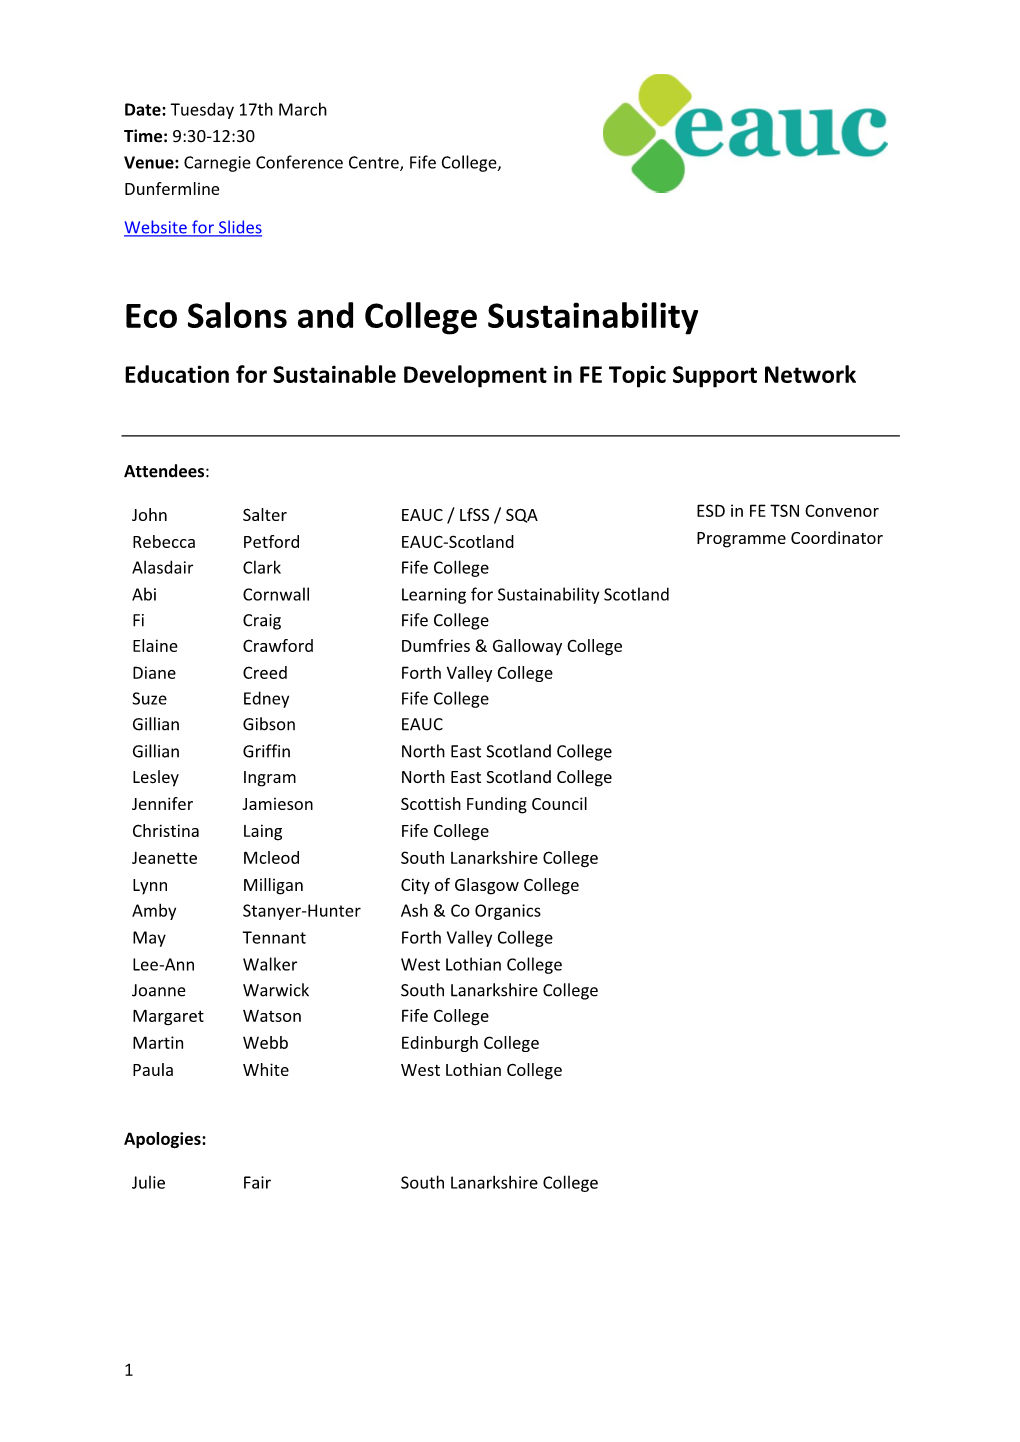 Eco Salons and College Sustainability